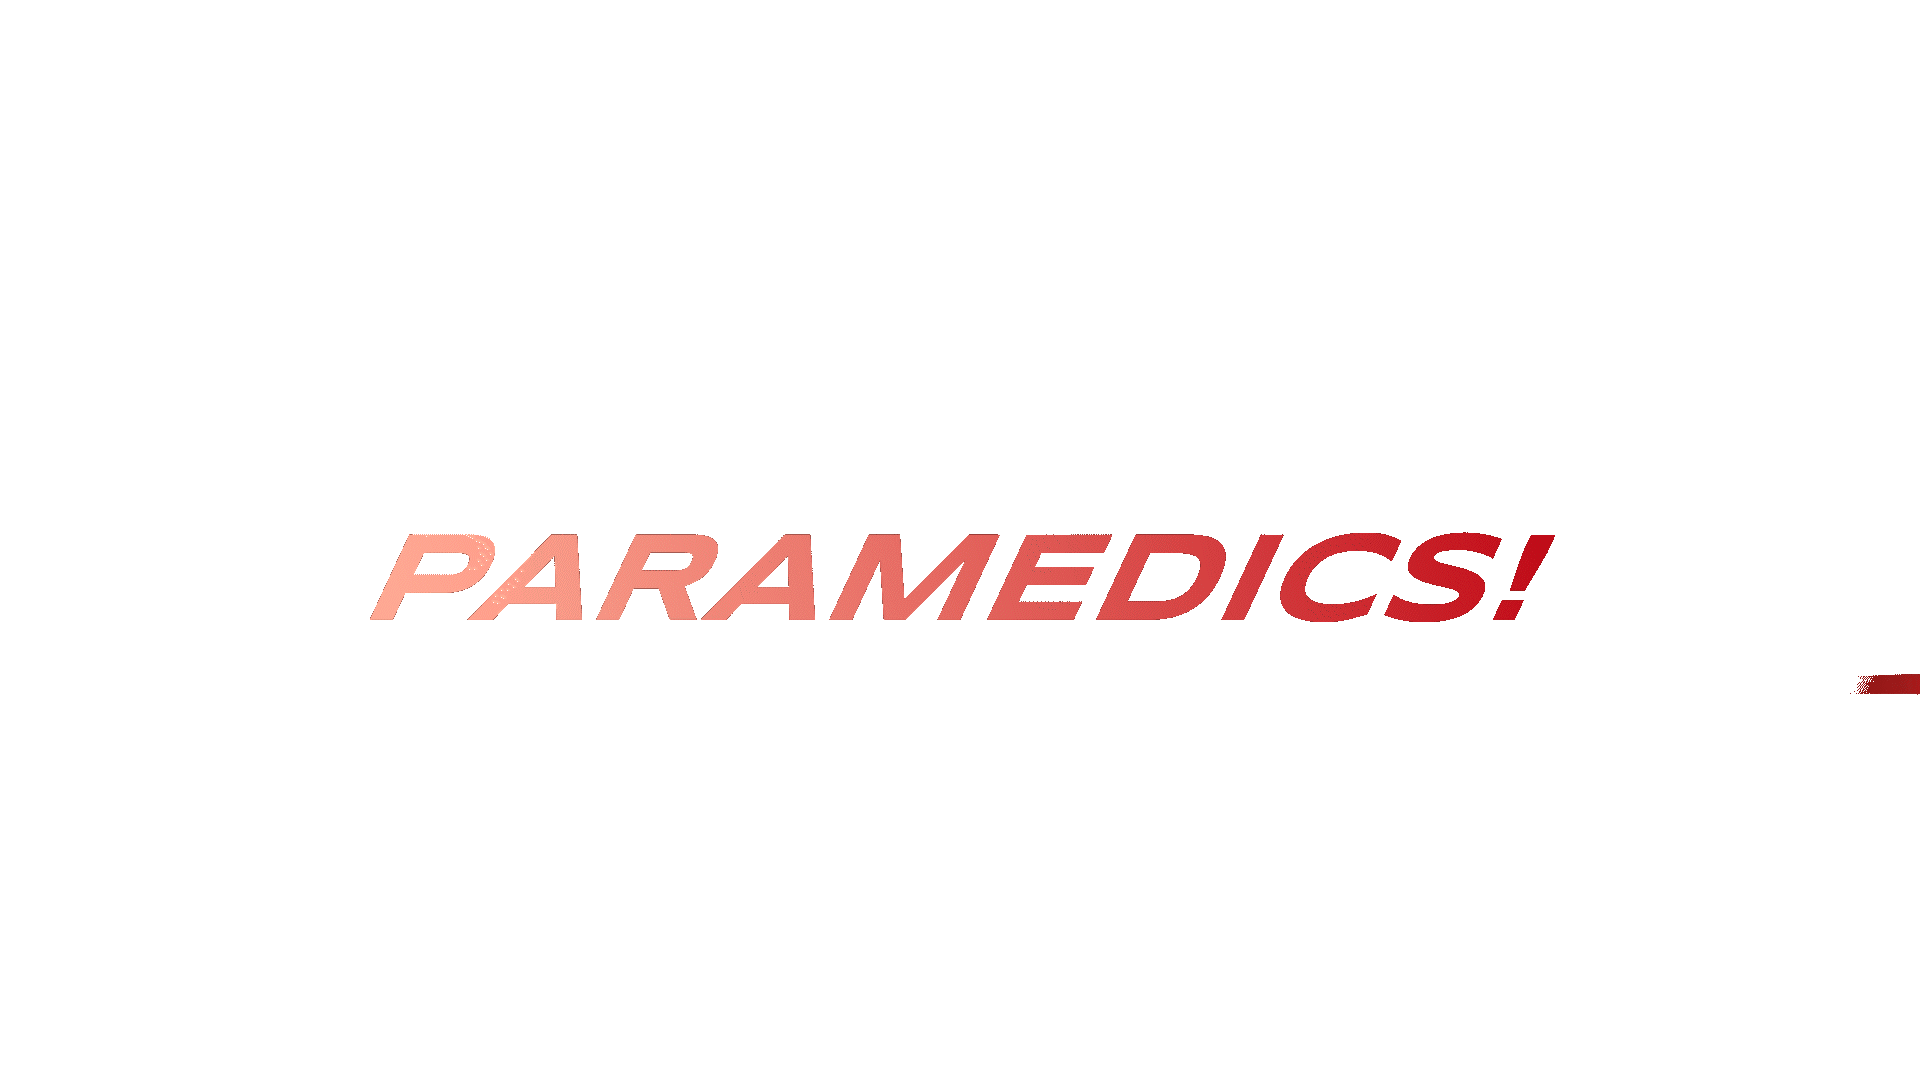 ECG Line animated and paramedics! logo in front